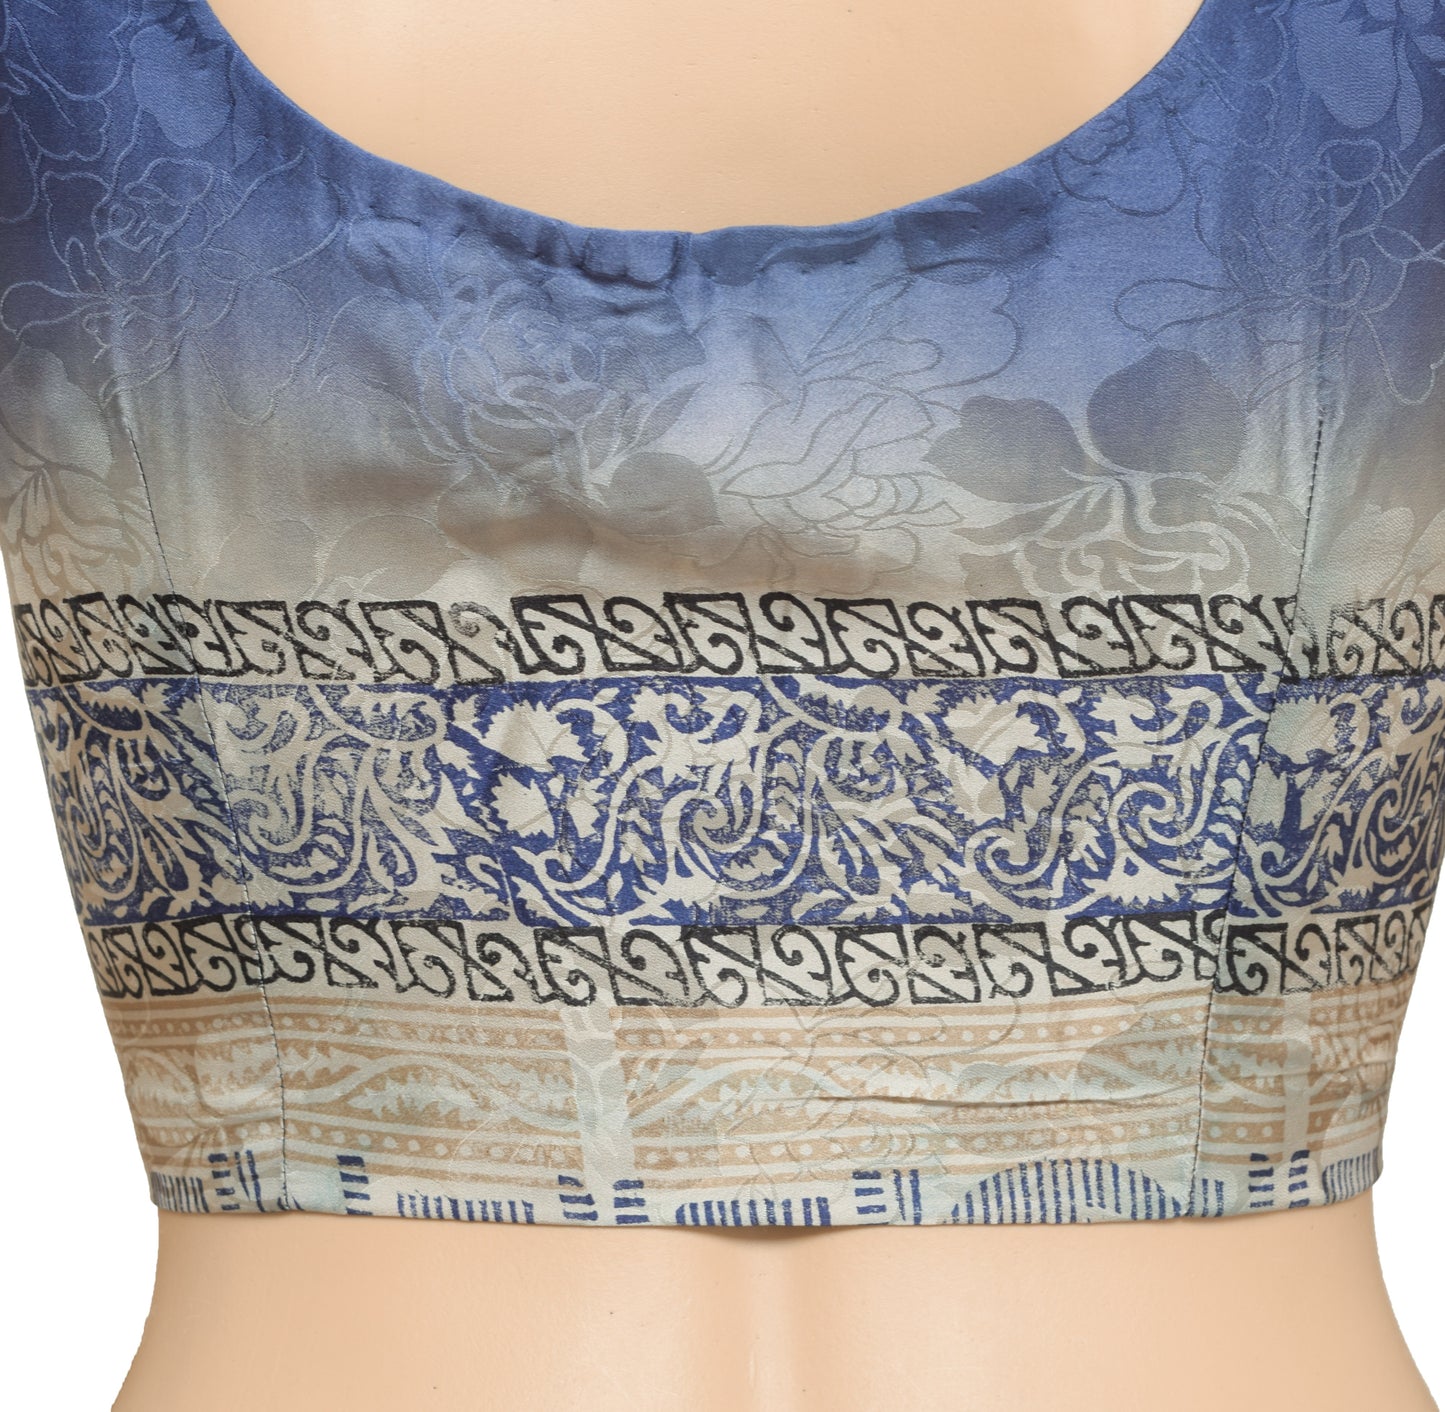 Sushila Vintage Readymade Stitched Blue Sleeveless Sari Blouse Woven Floral Top